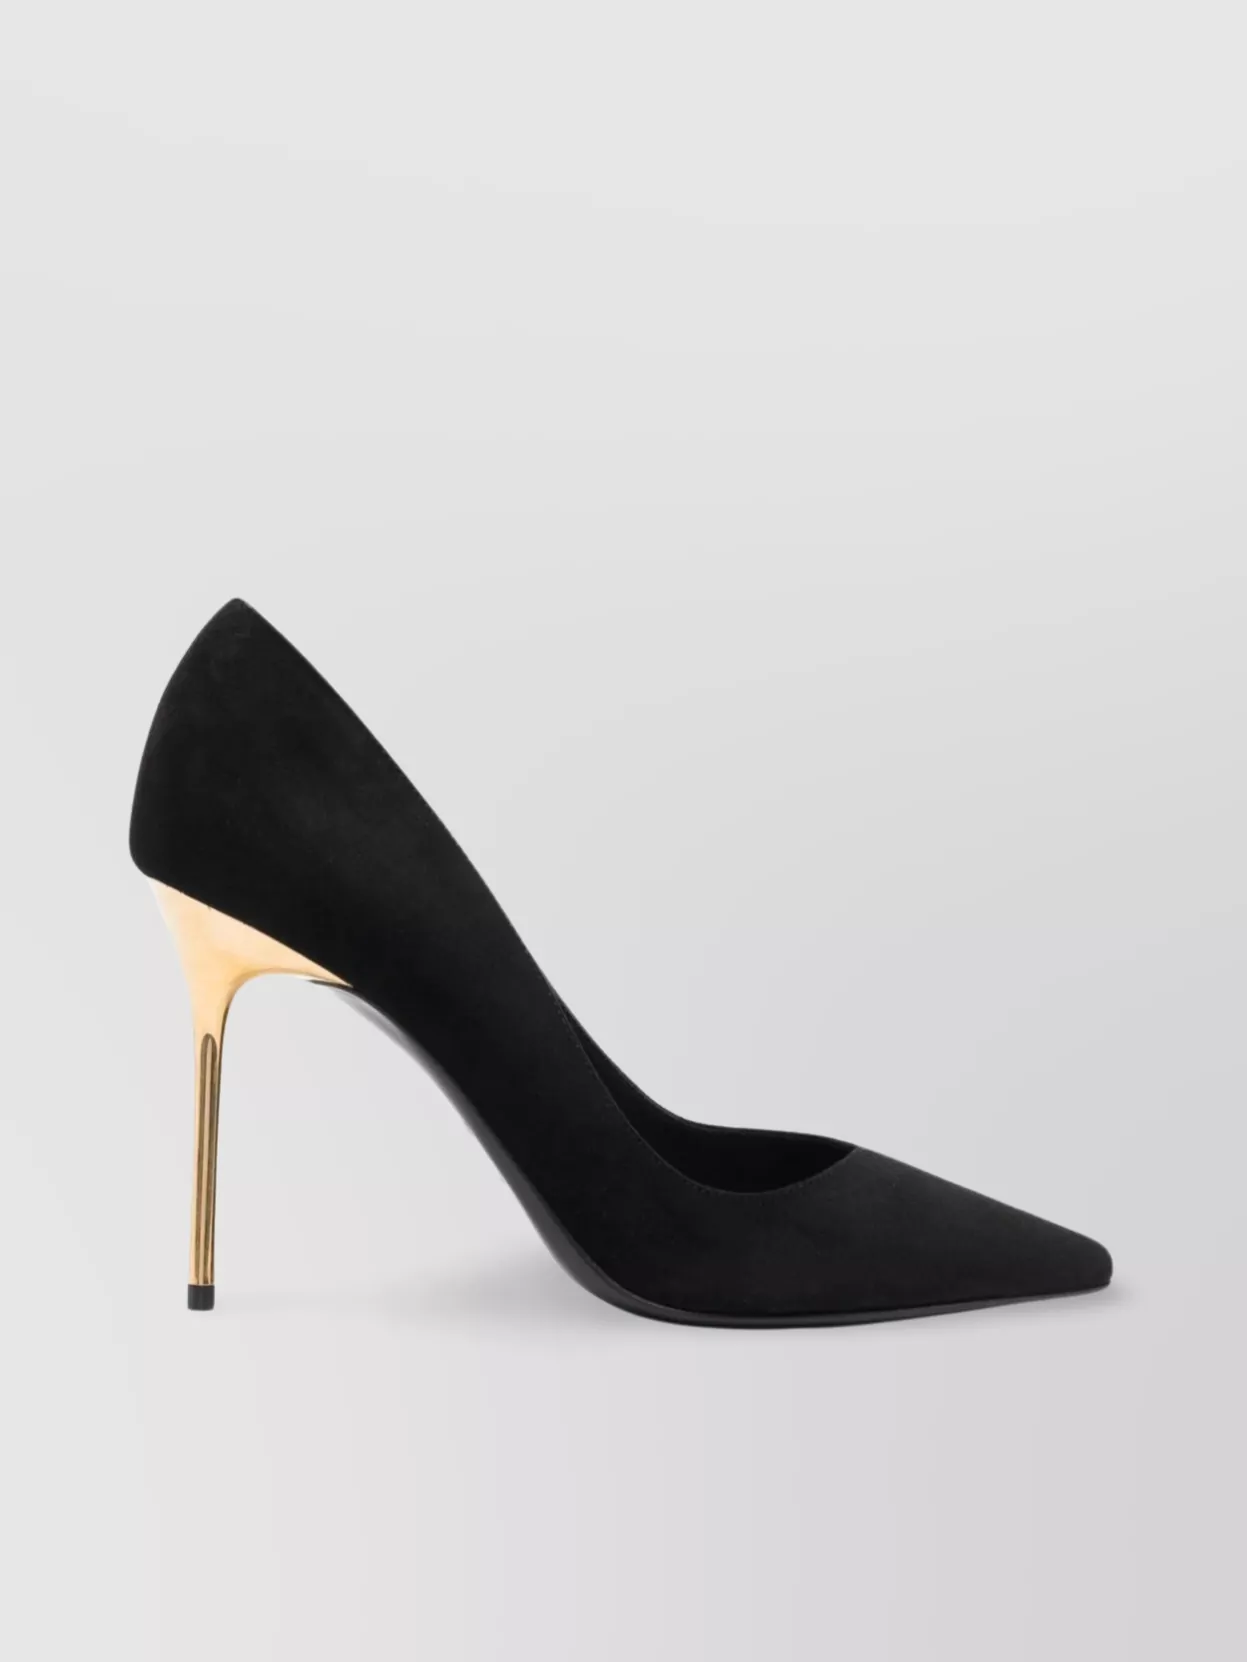 BALMAIN POINTED TOE STILETTO PUMPS WITH CONTRASTING HEEL